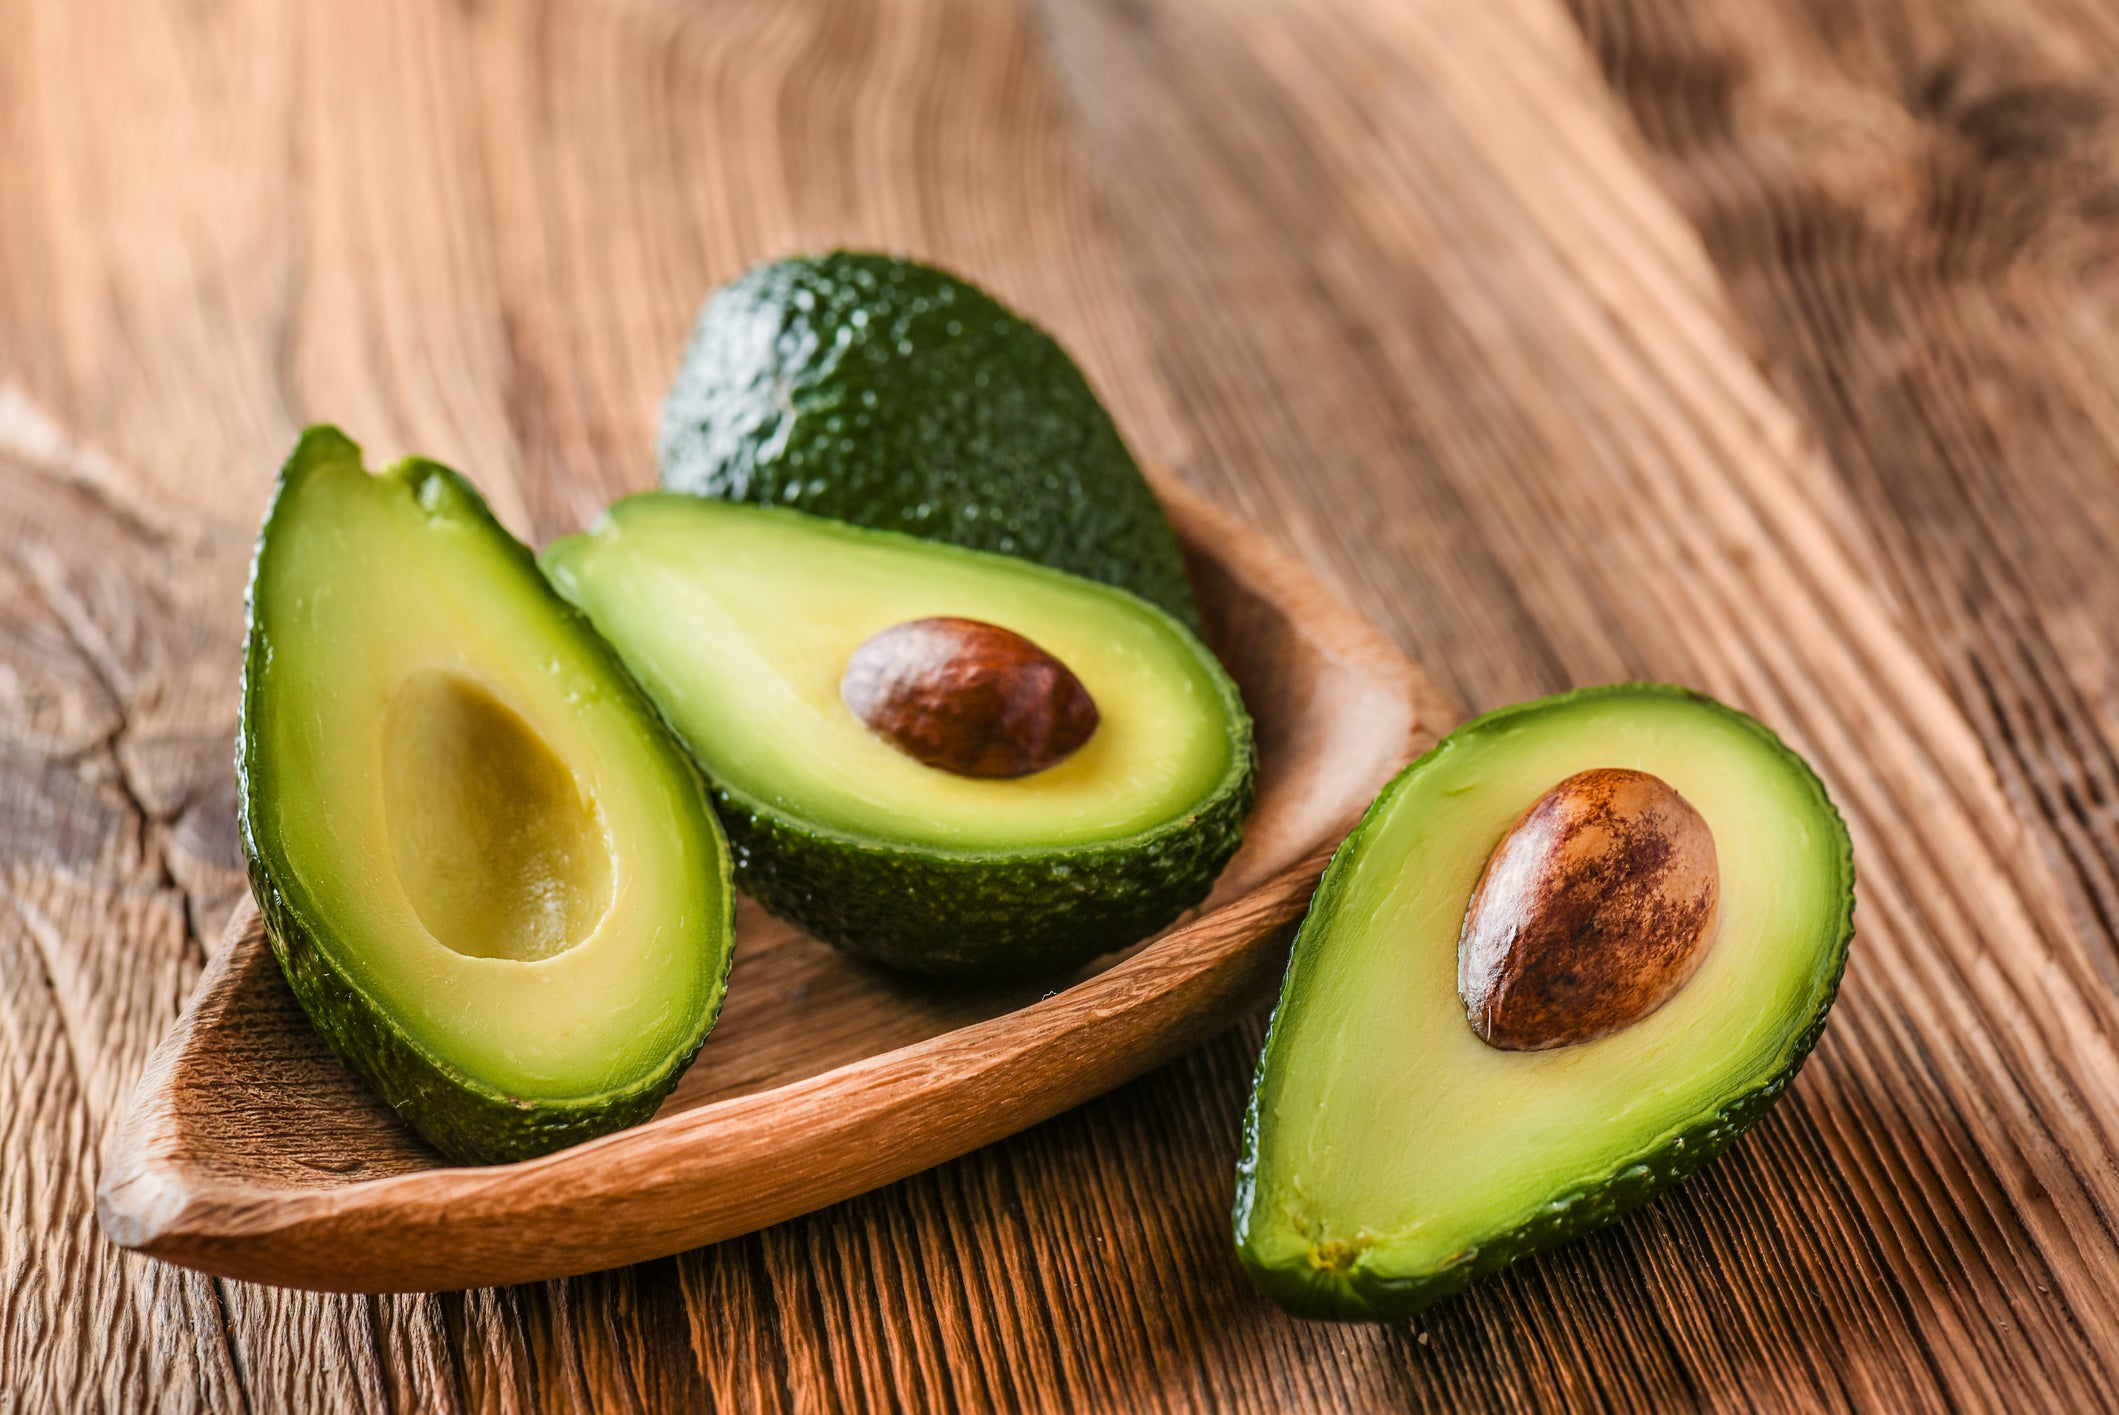 Production of avocados spiked in Australia over the last decade